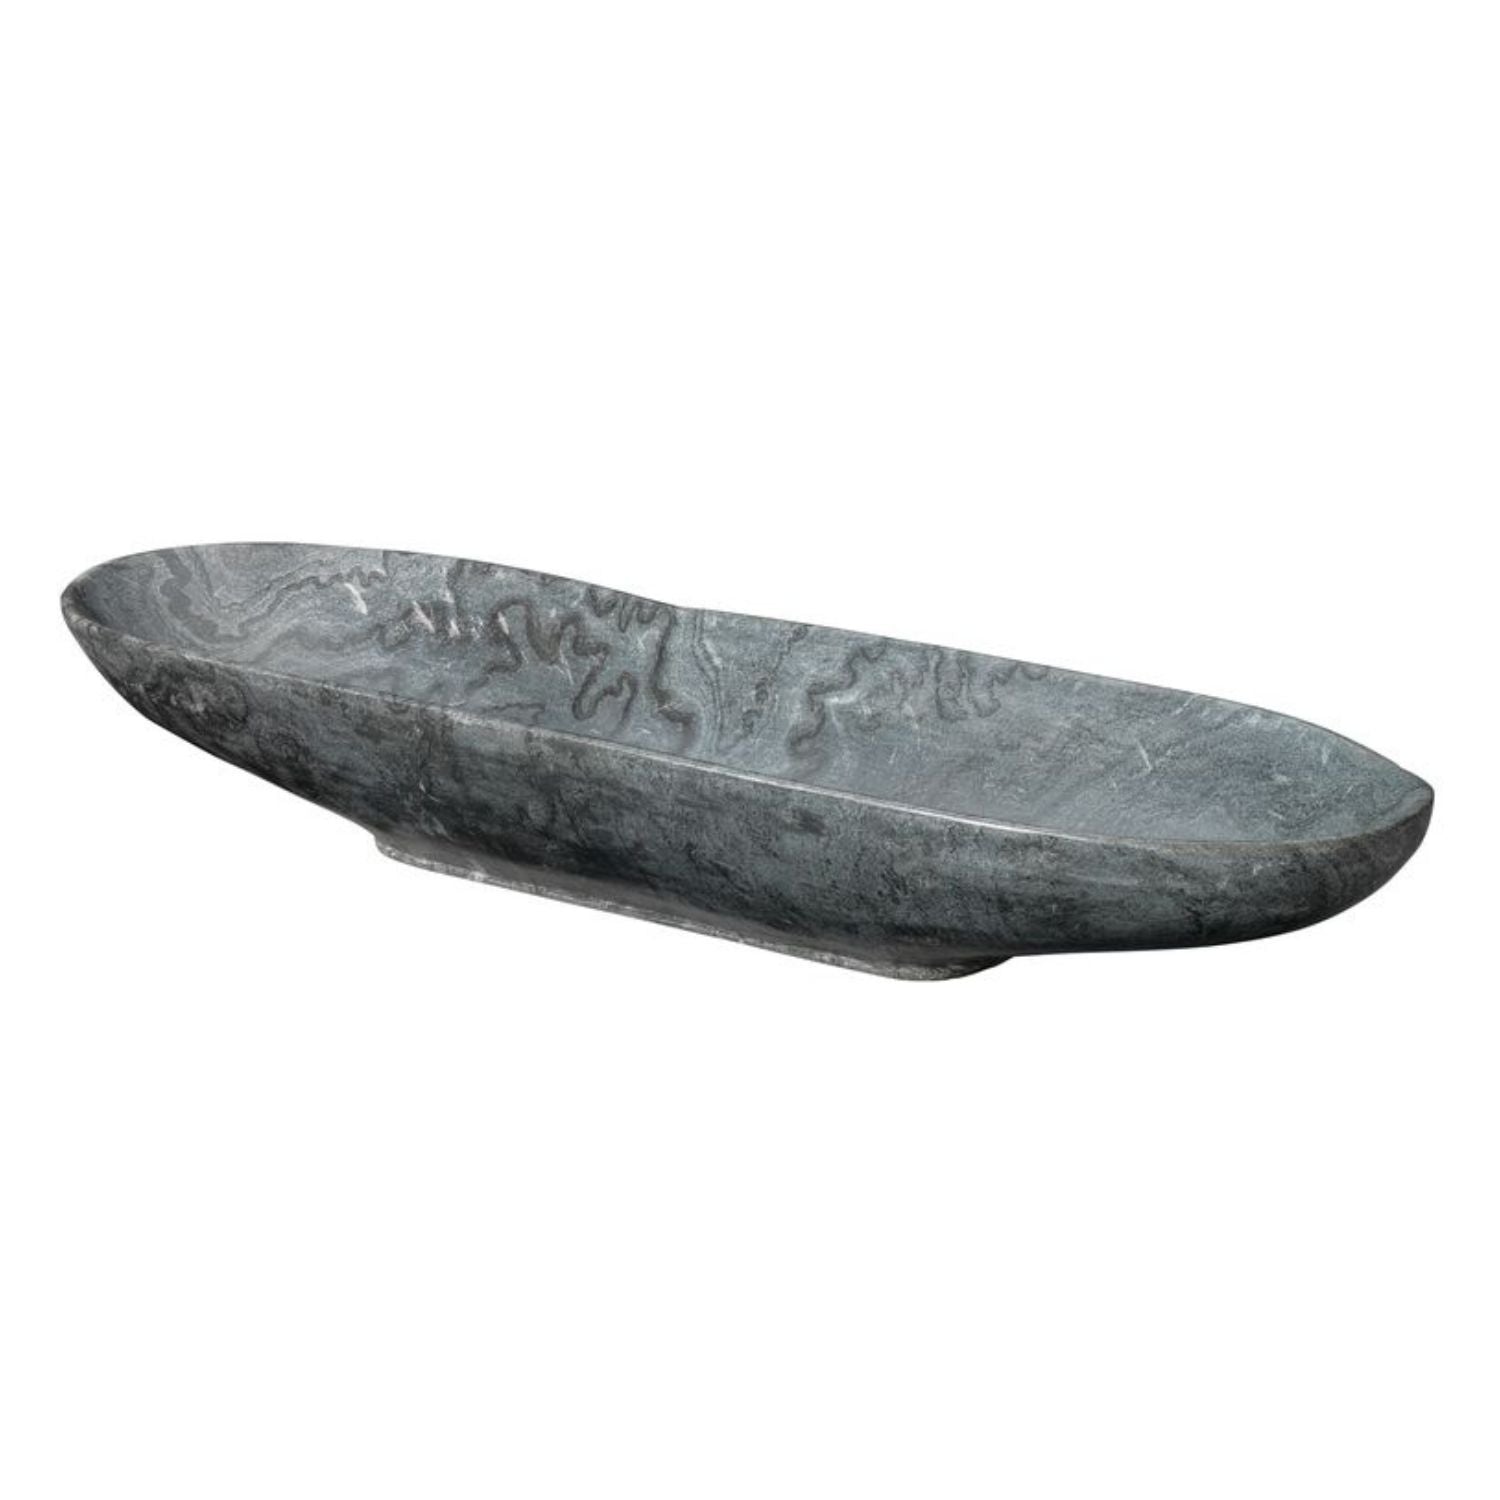 Long Oval Marble Bowl, Grey